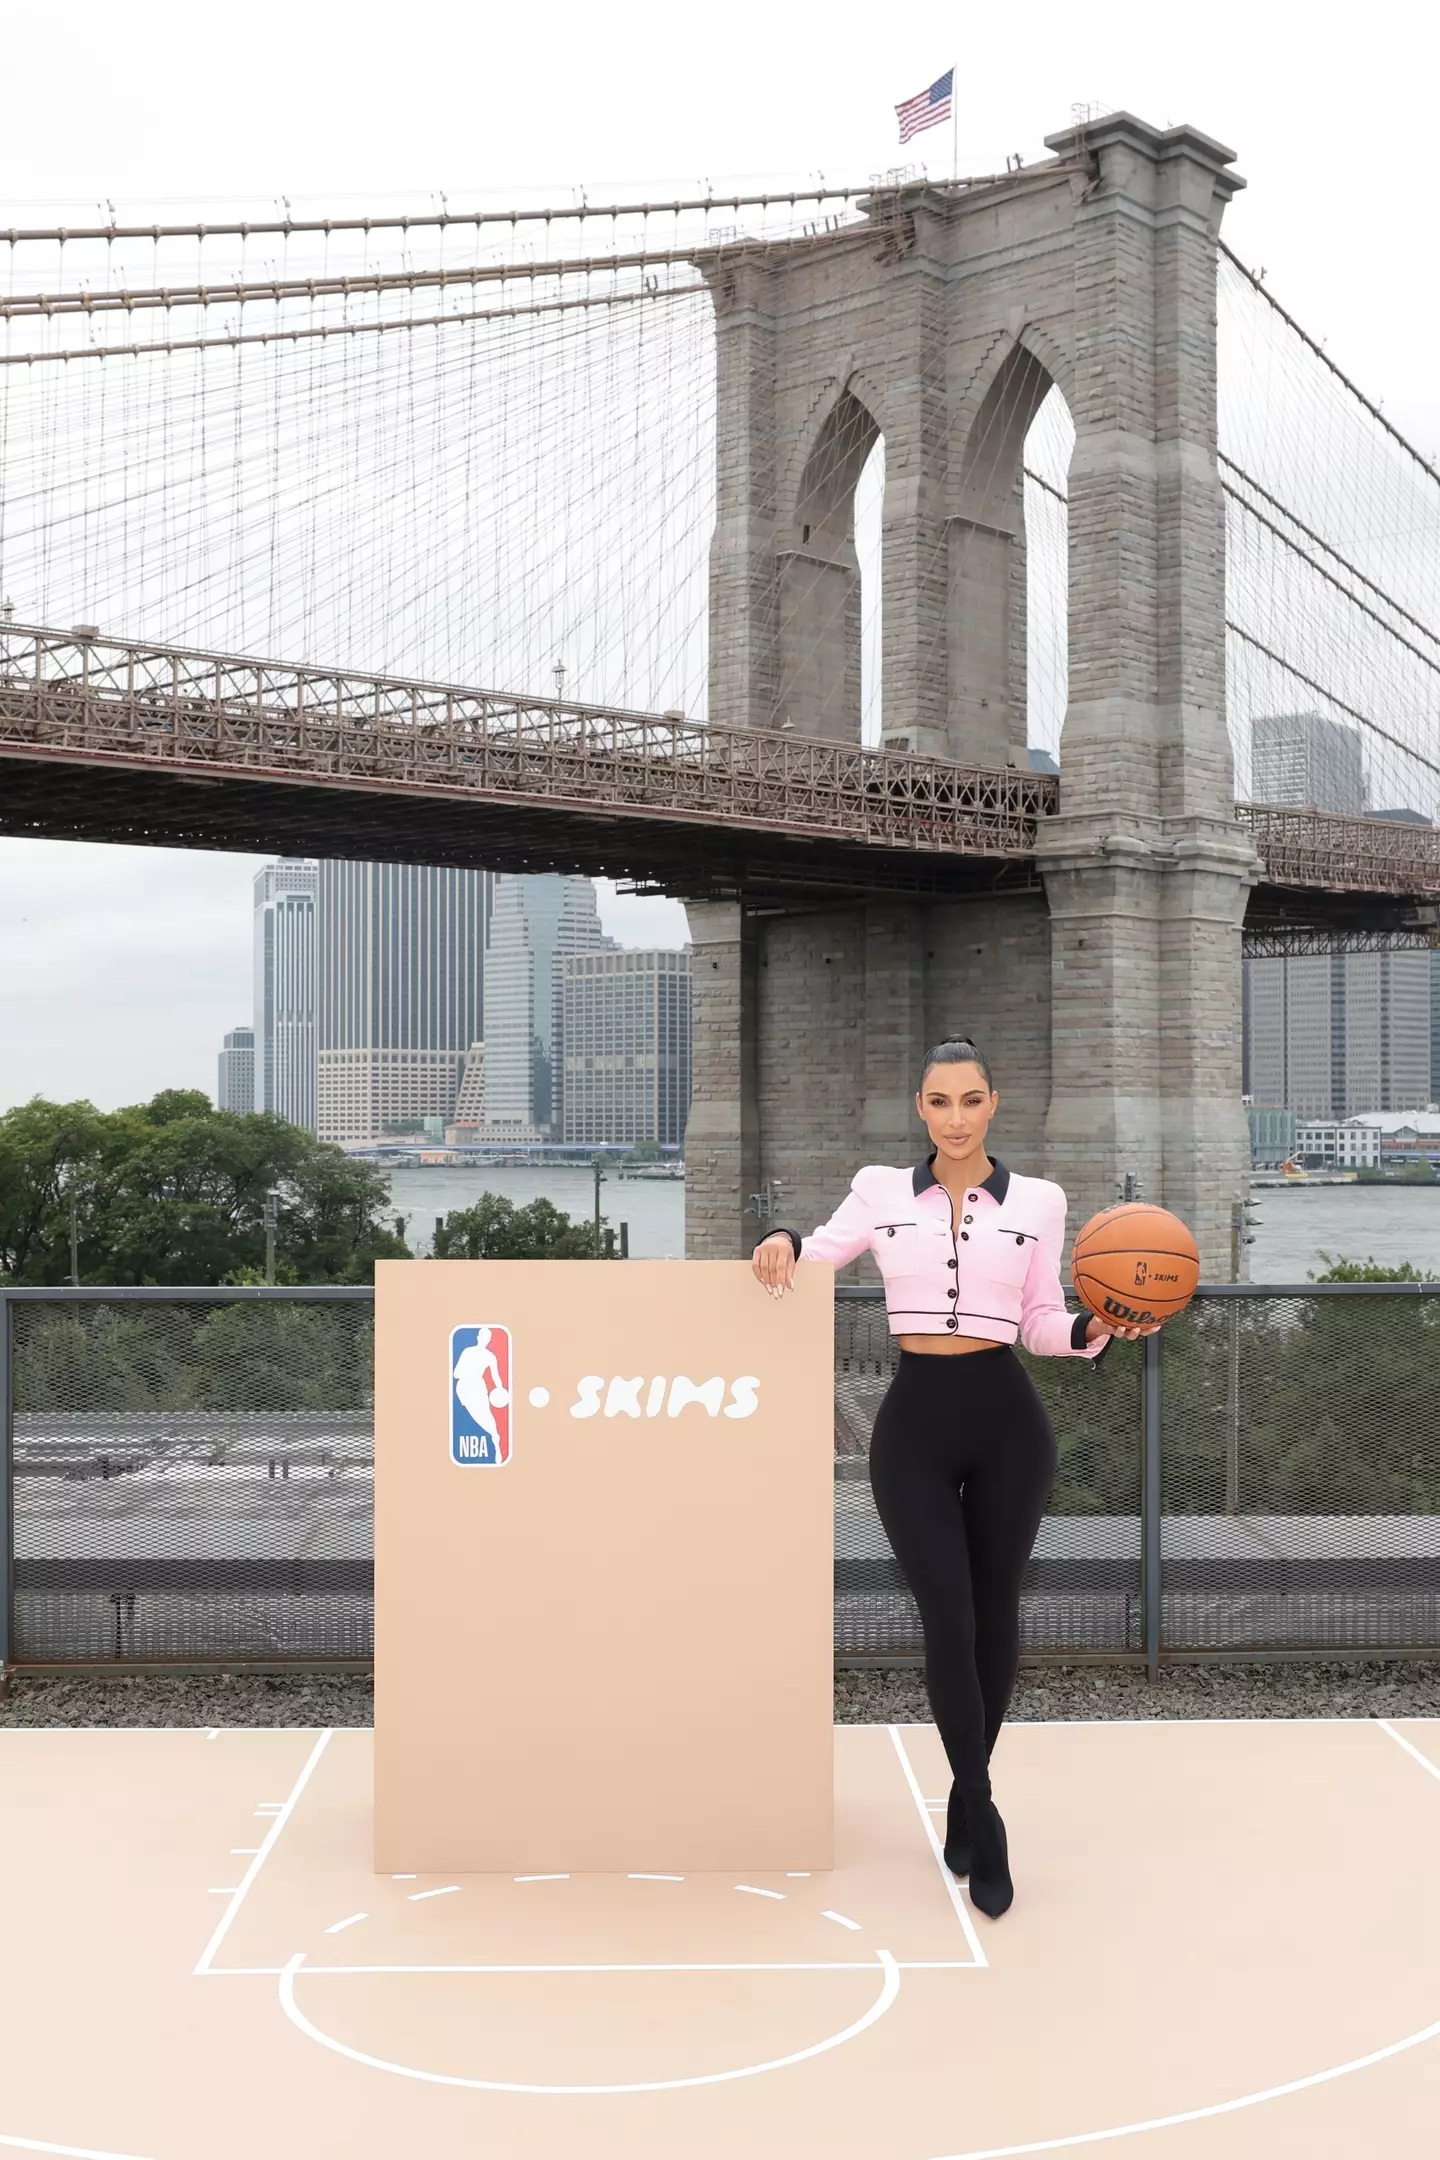 Skims recently became the Official Underwear Partner of the NBA.